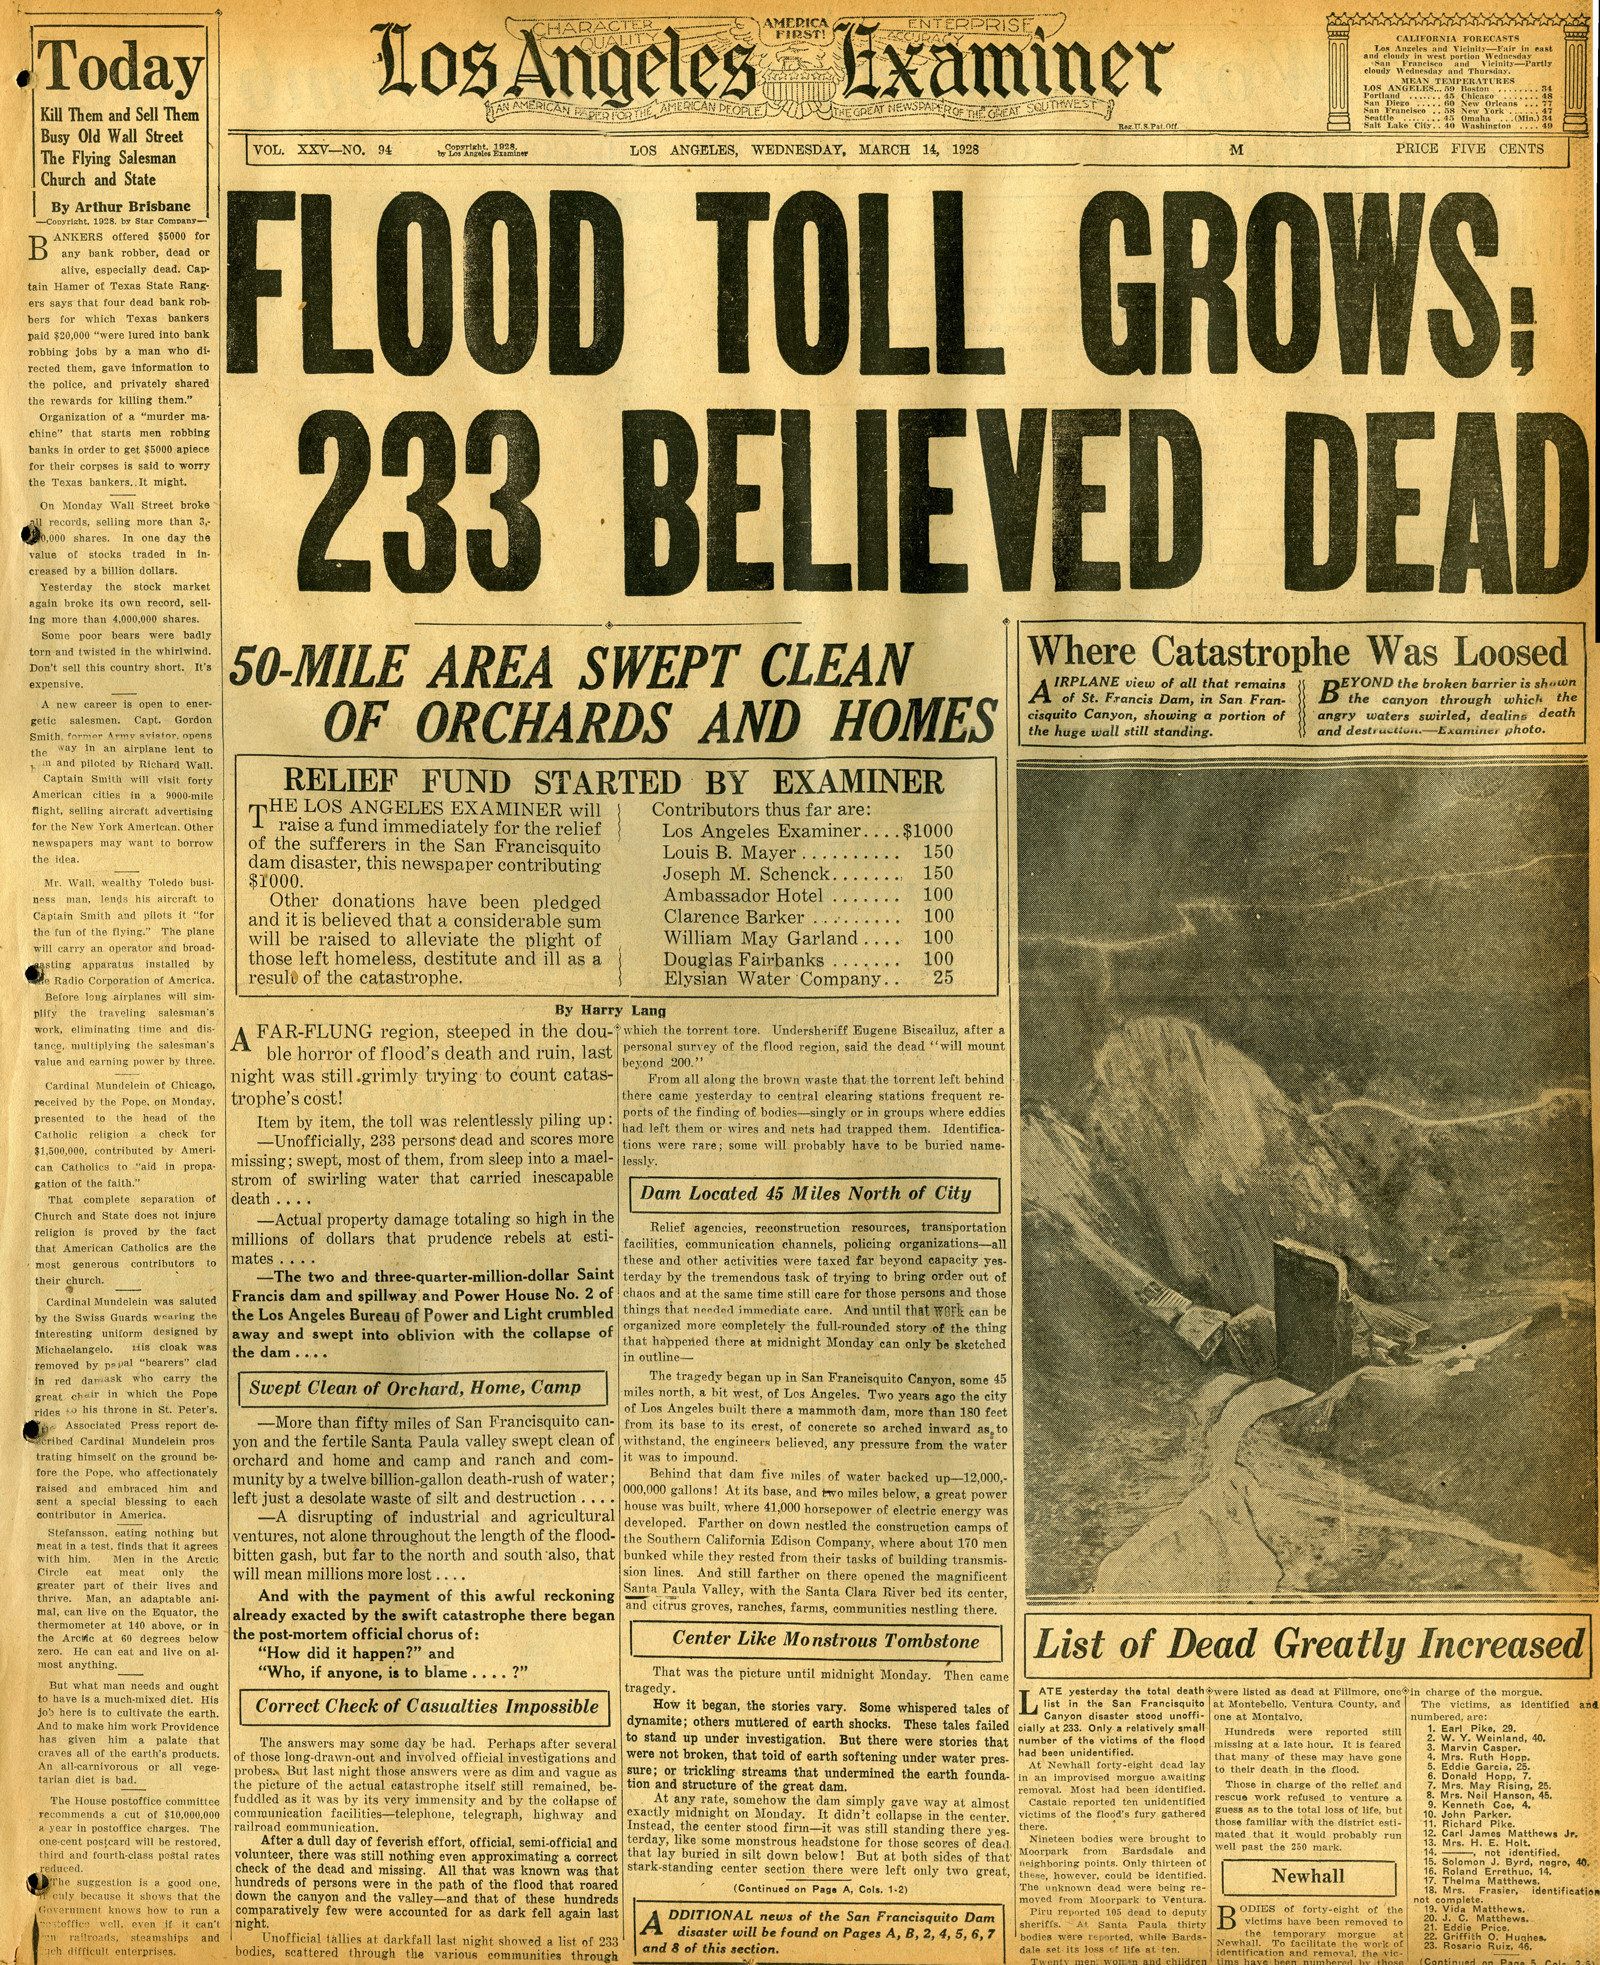 St. Francis Dam Disaster

LOS ANGELES EXAMINER

Los Angeles, California | Wednesday, March 14, 1928